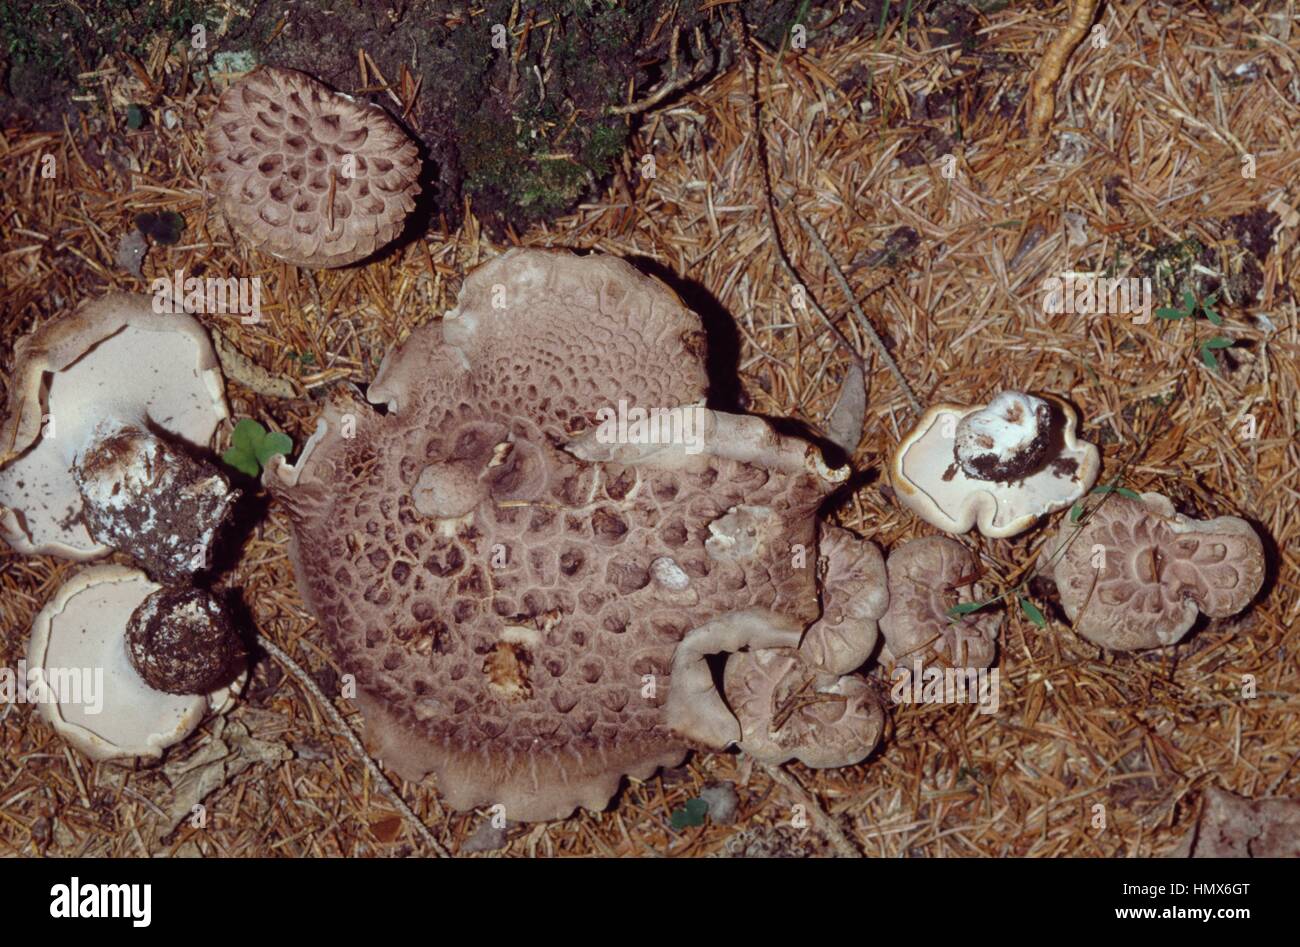 Scaly Tooth, Shingled hedgehog or Scaly hedgehog (Sarcodon imbricatus), Bankeraceae. Stock Photo